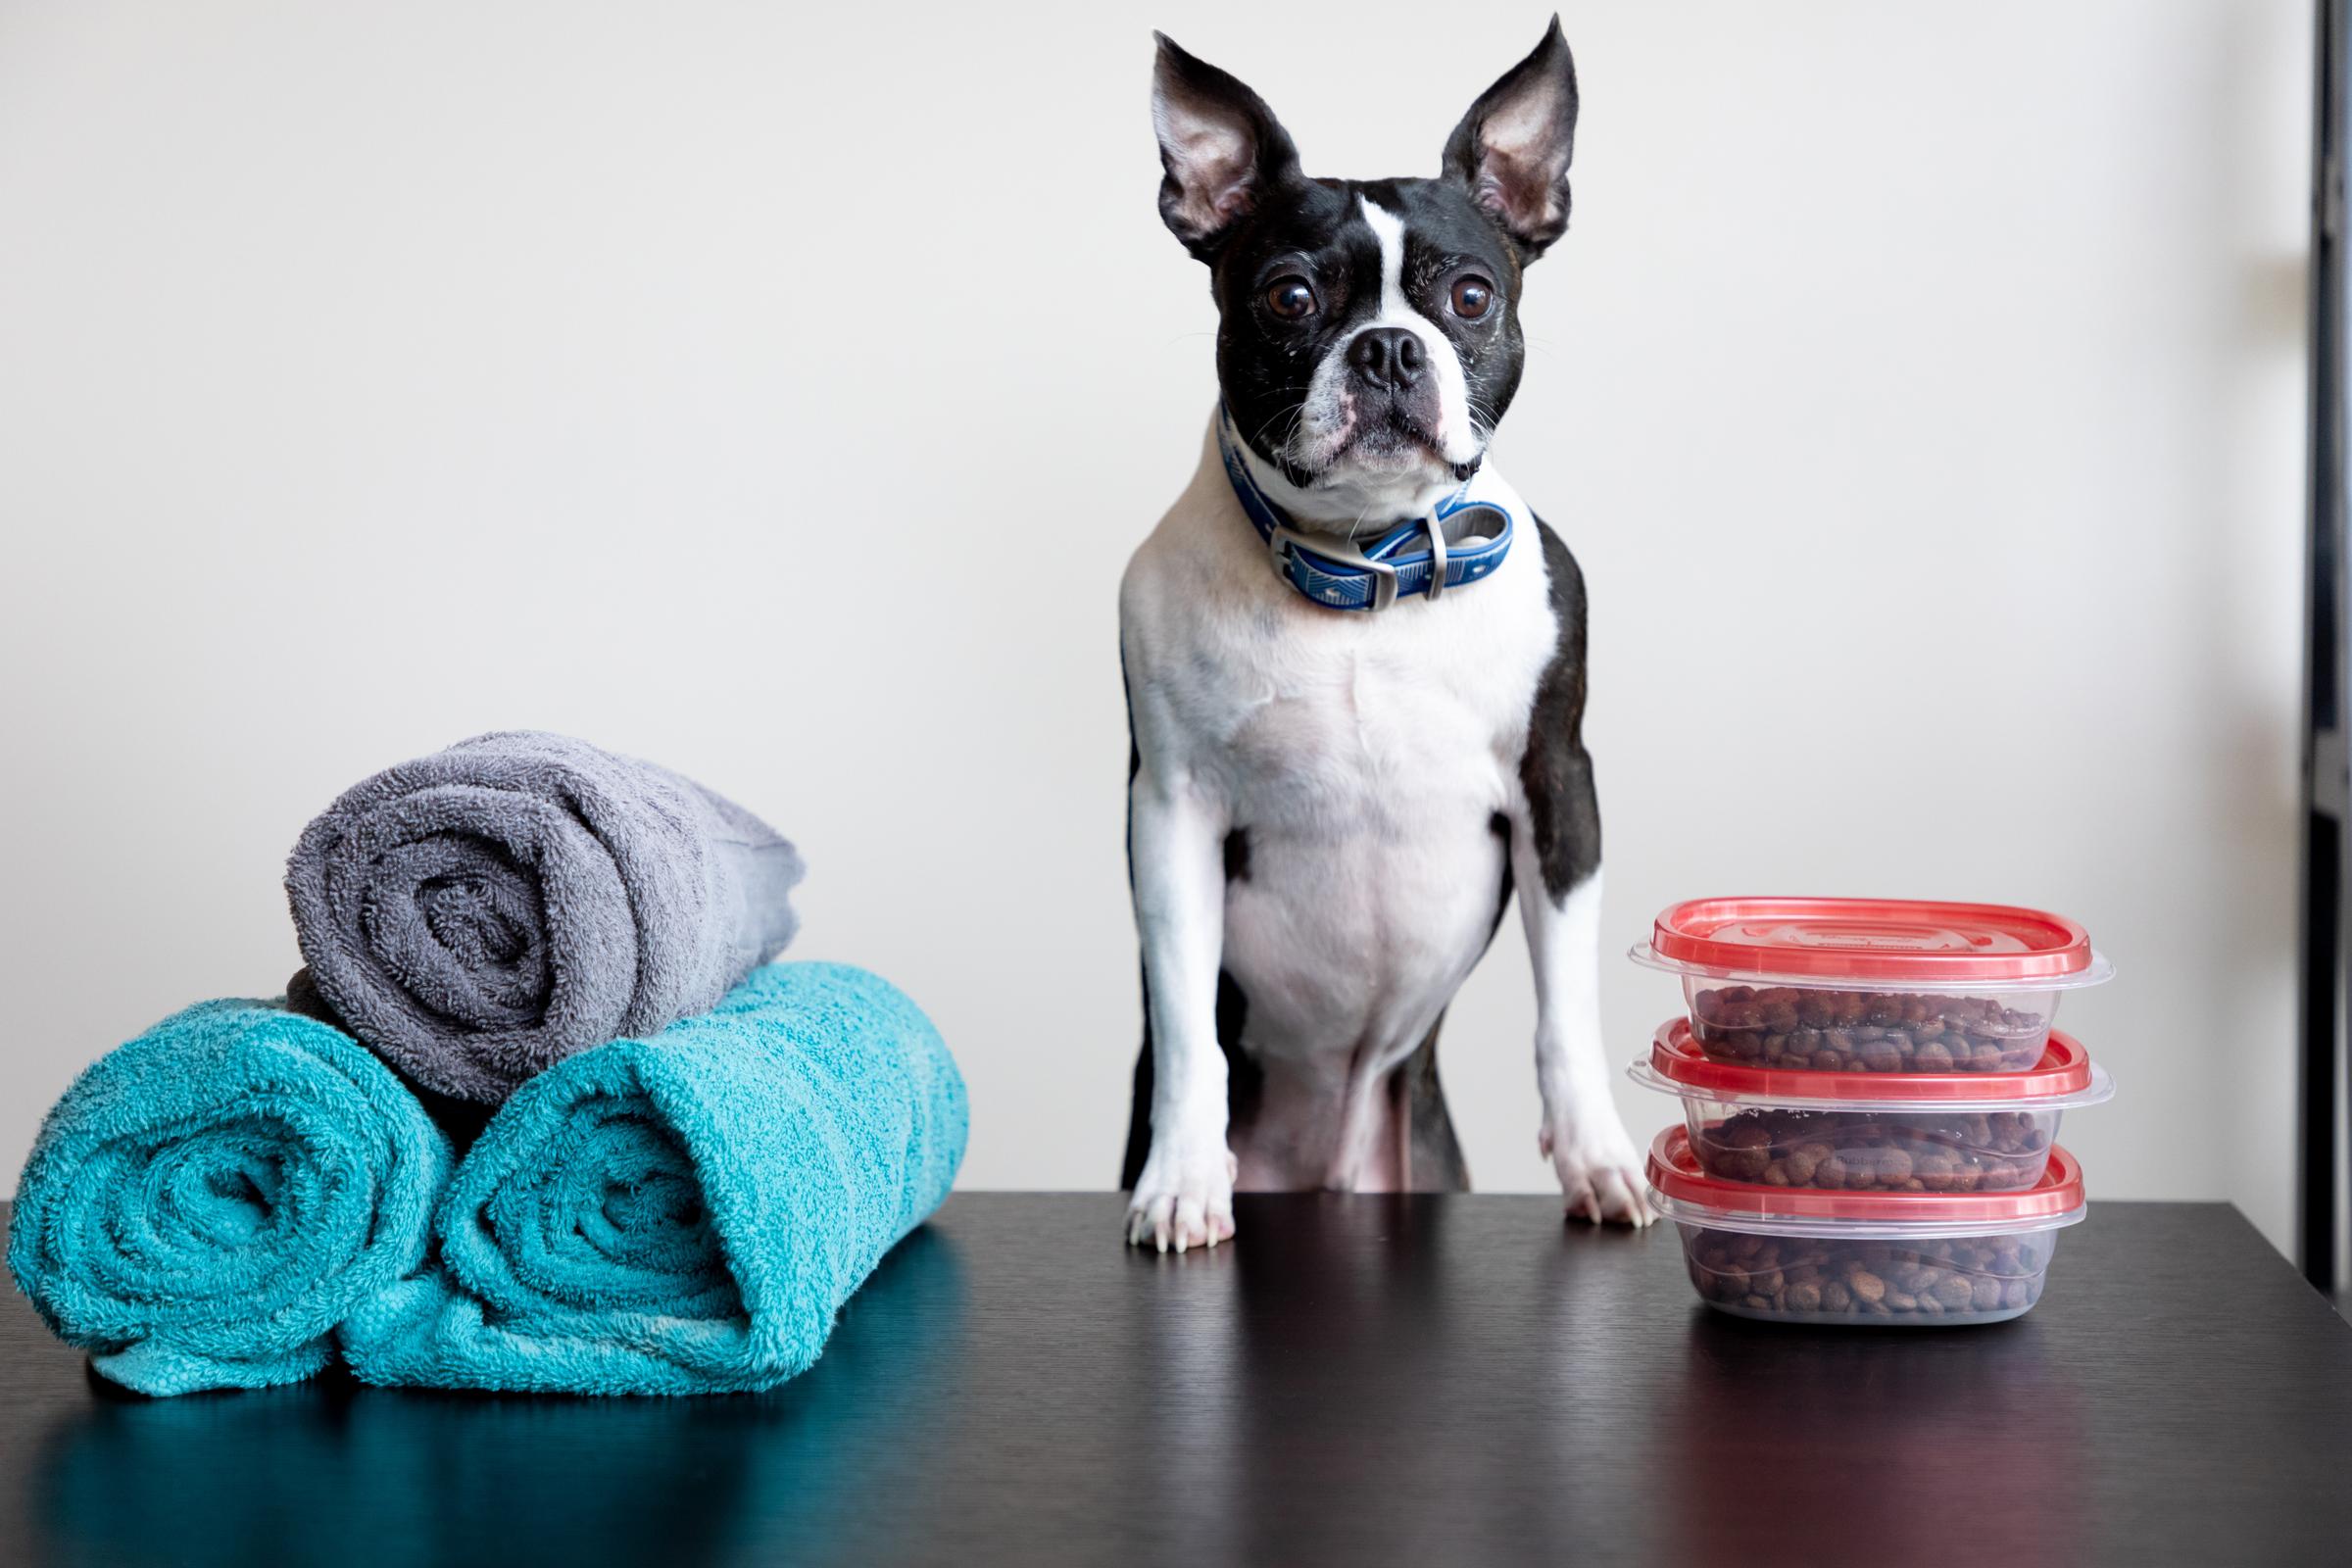 Doggy essentials don't have to come from the pet store!